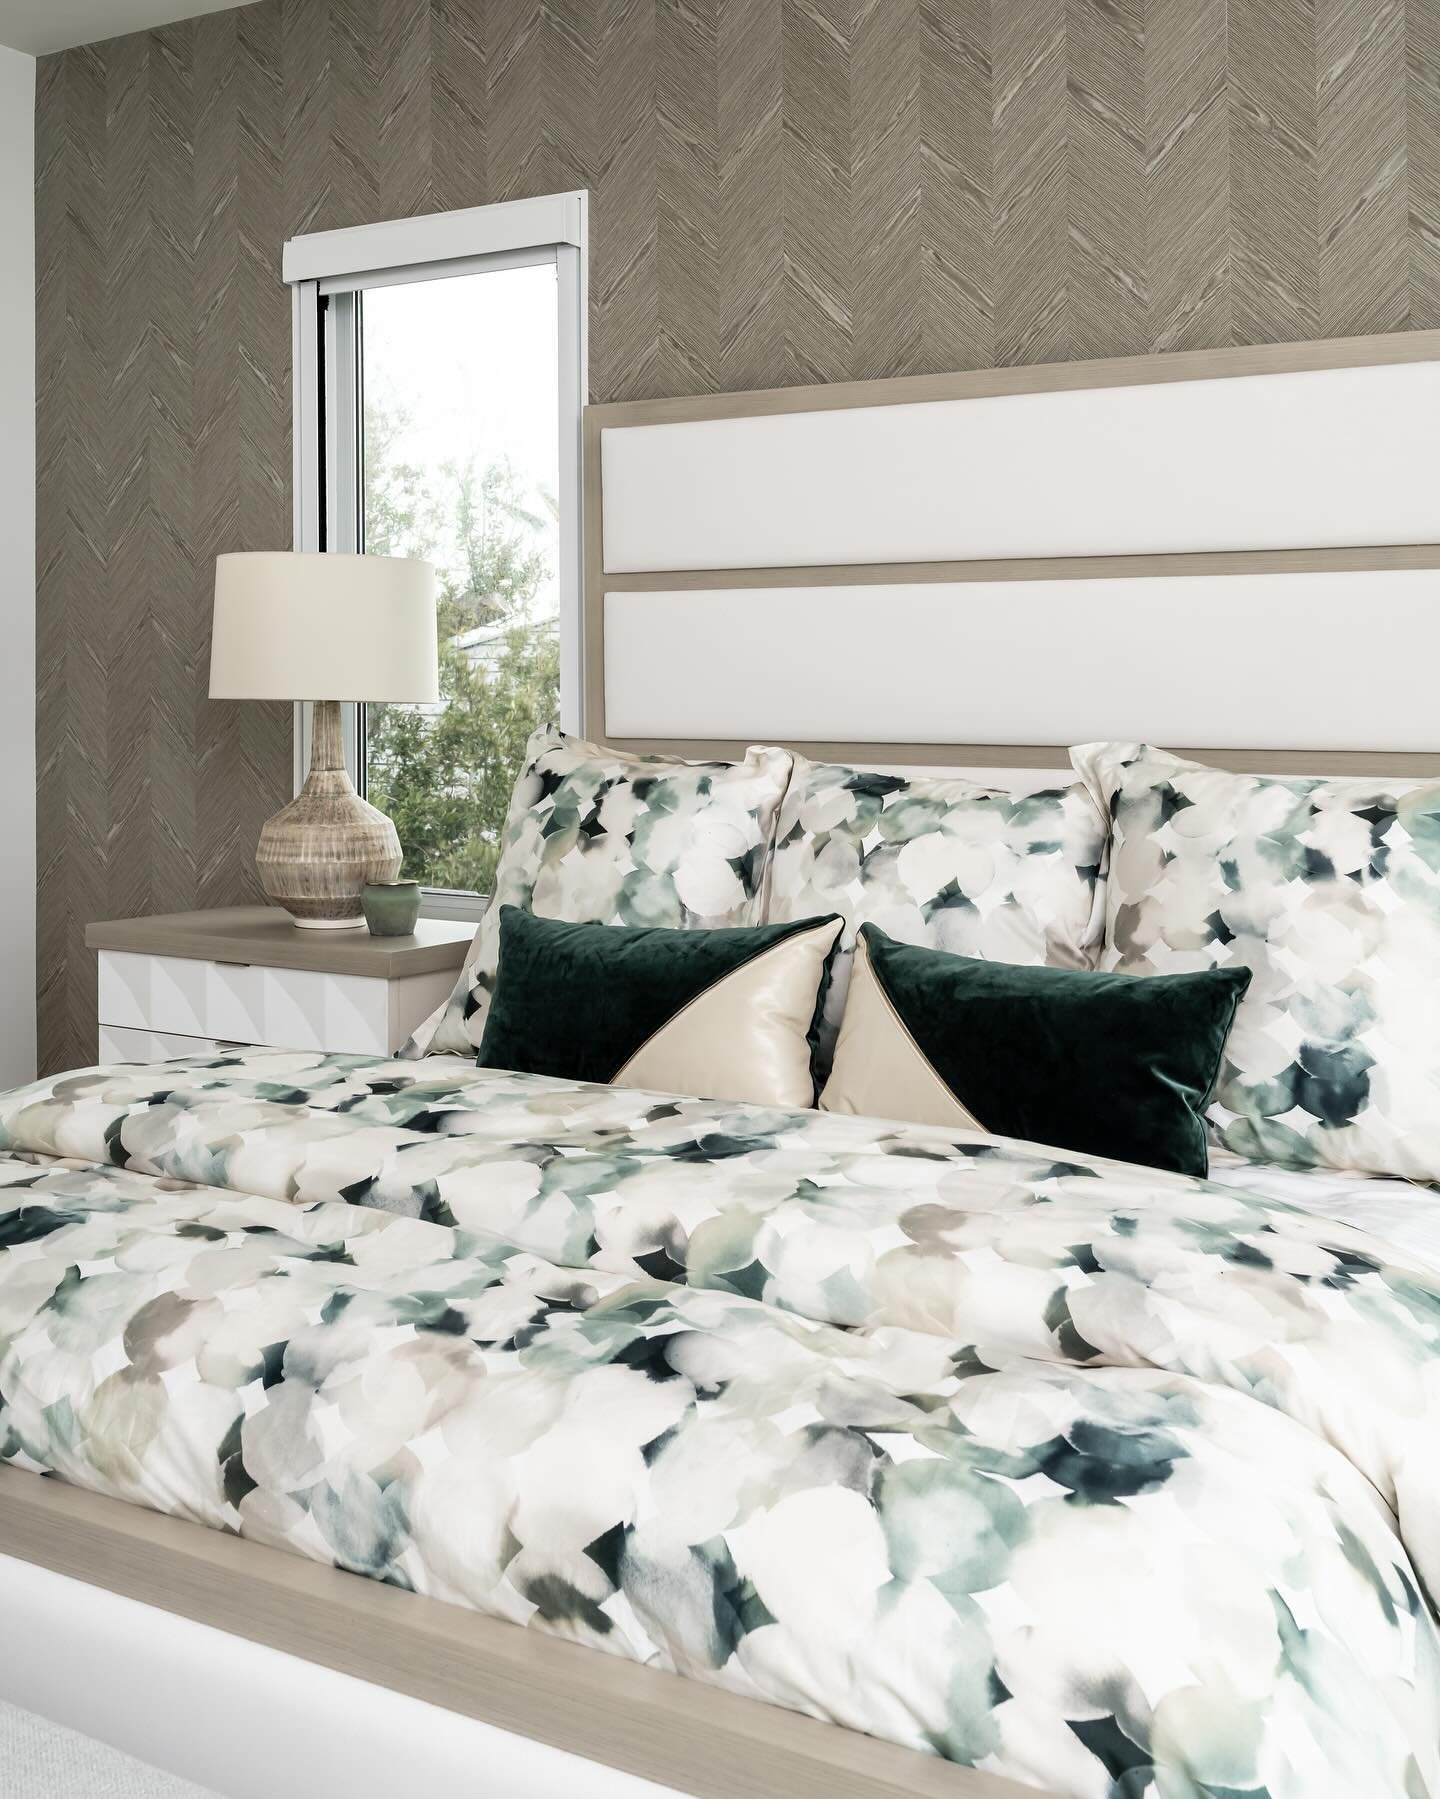 This Bedroom deserves to be the center of attention, thanks to its breathtaking wallpaper that captures the eye and creates a serene atmosphere. Every piece of furniture and decor has been carefully selected to complement each other, resulting in a c